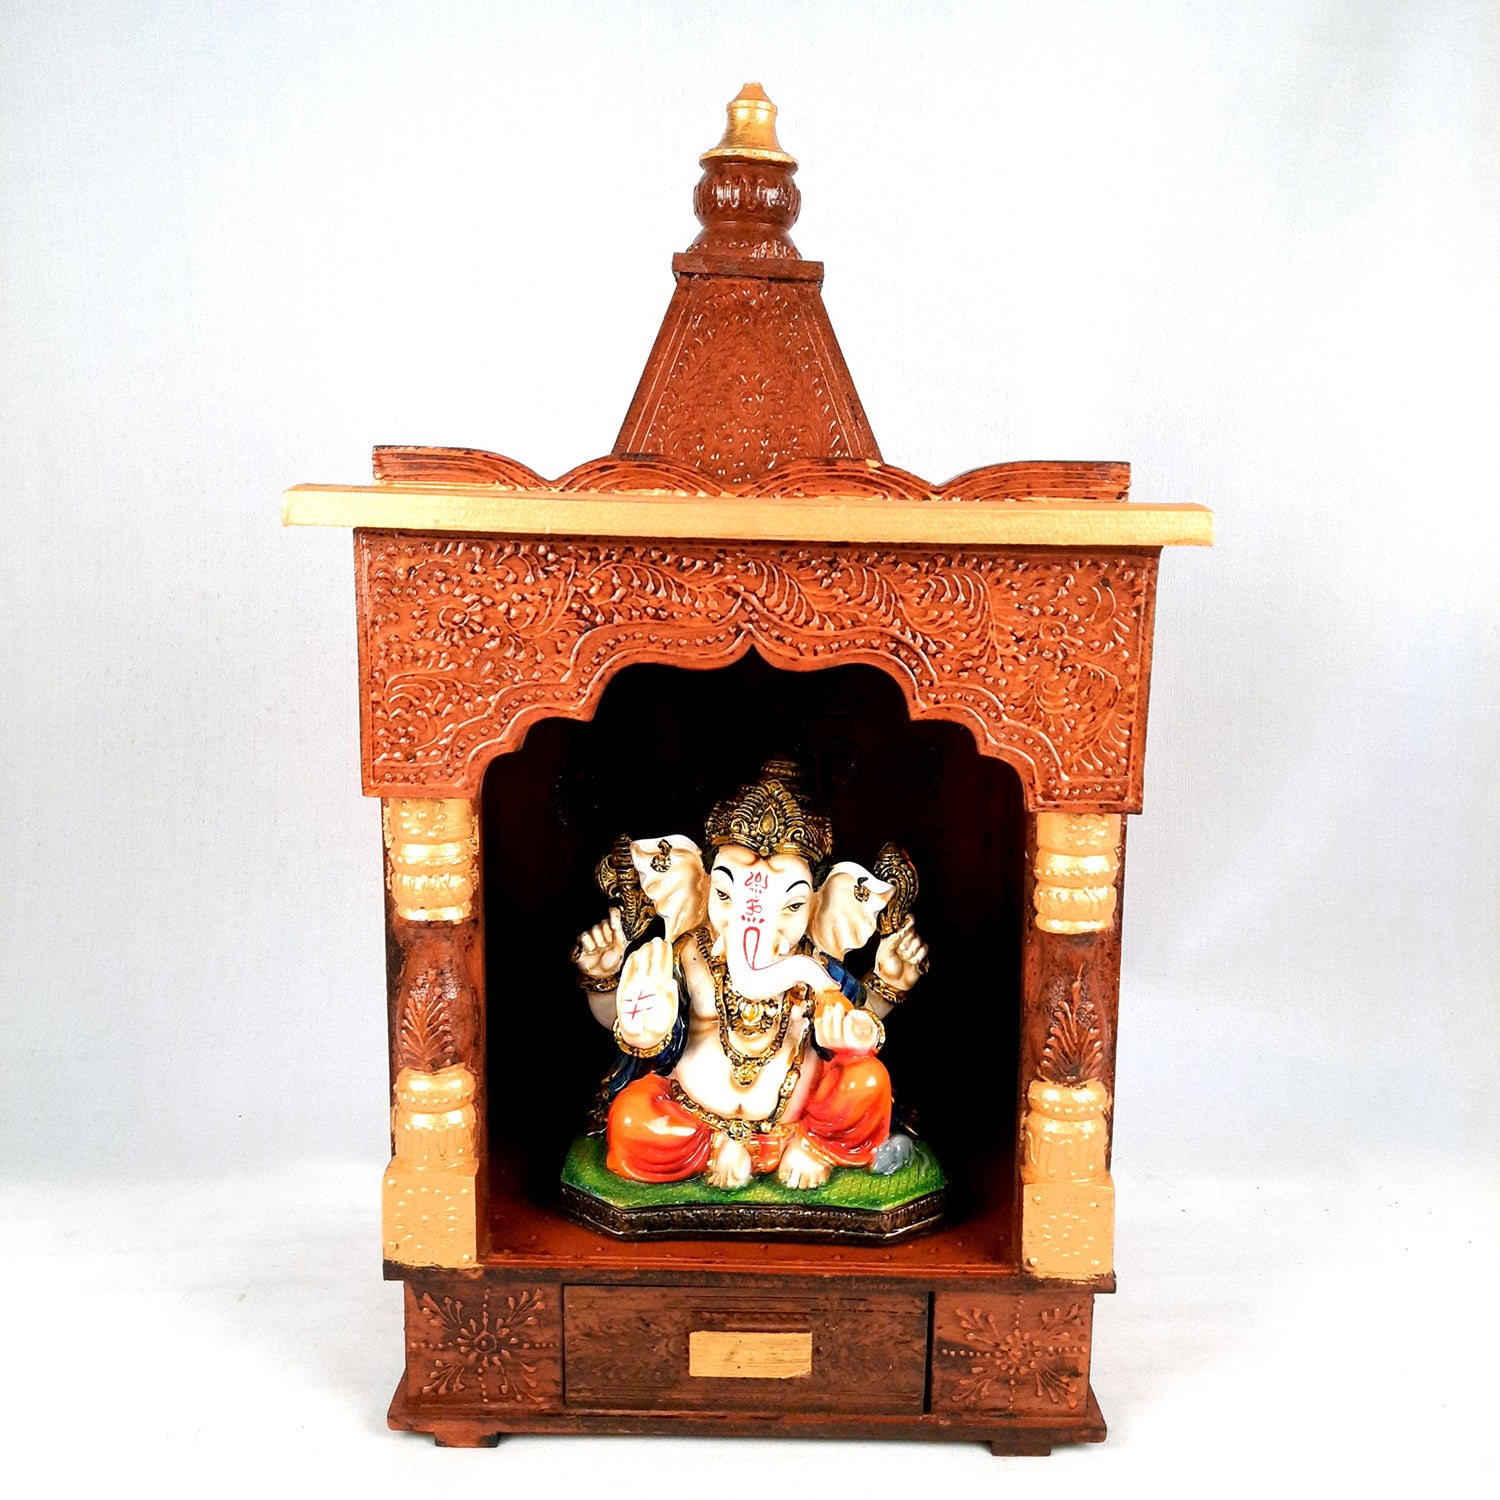 Pooja Temple Wooden With Closed Sides | God Temple For Home | Antique Puja Stand Mandir - Wall Mounted – For Ghar, Office, Shop - 23 Inch - Apkamart